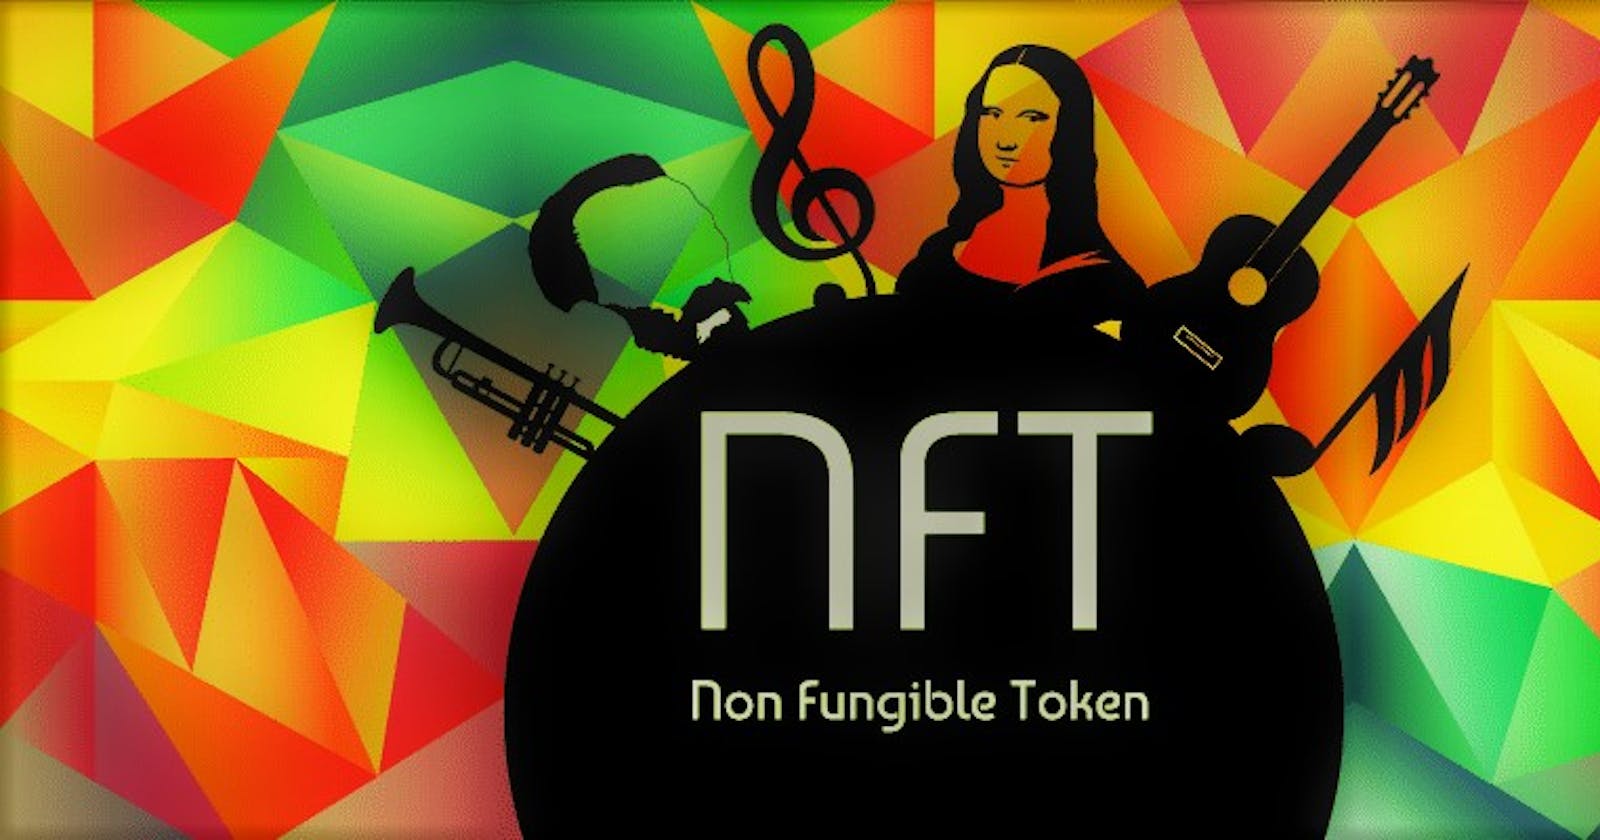 Why should we care about NFT? Here's why